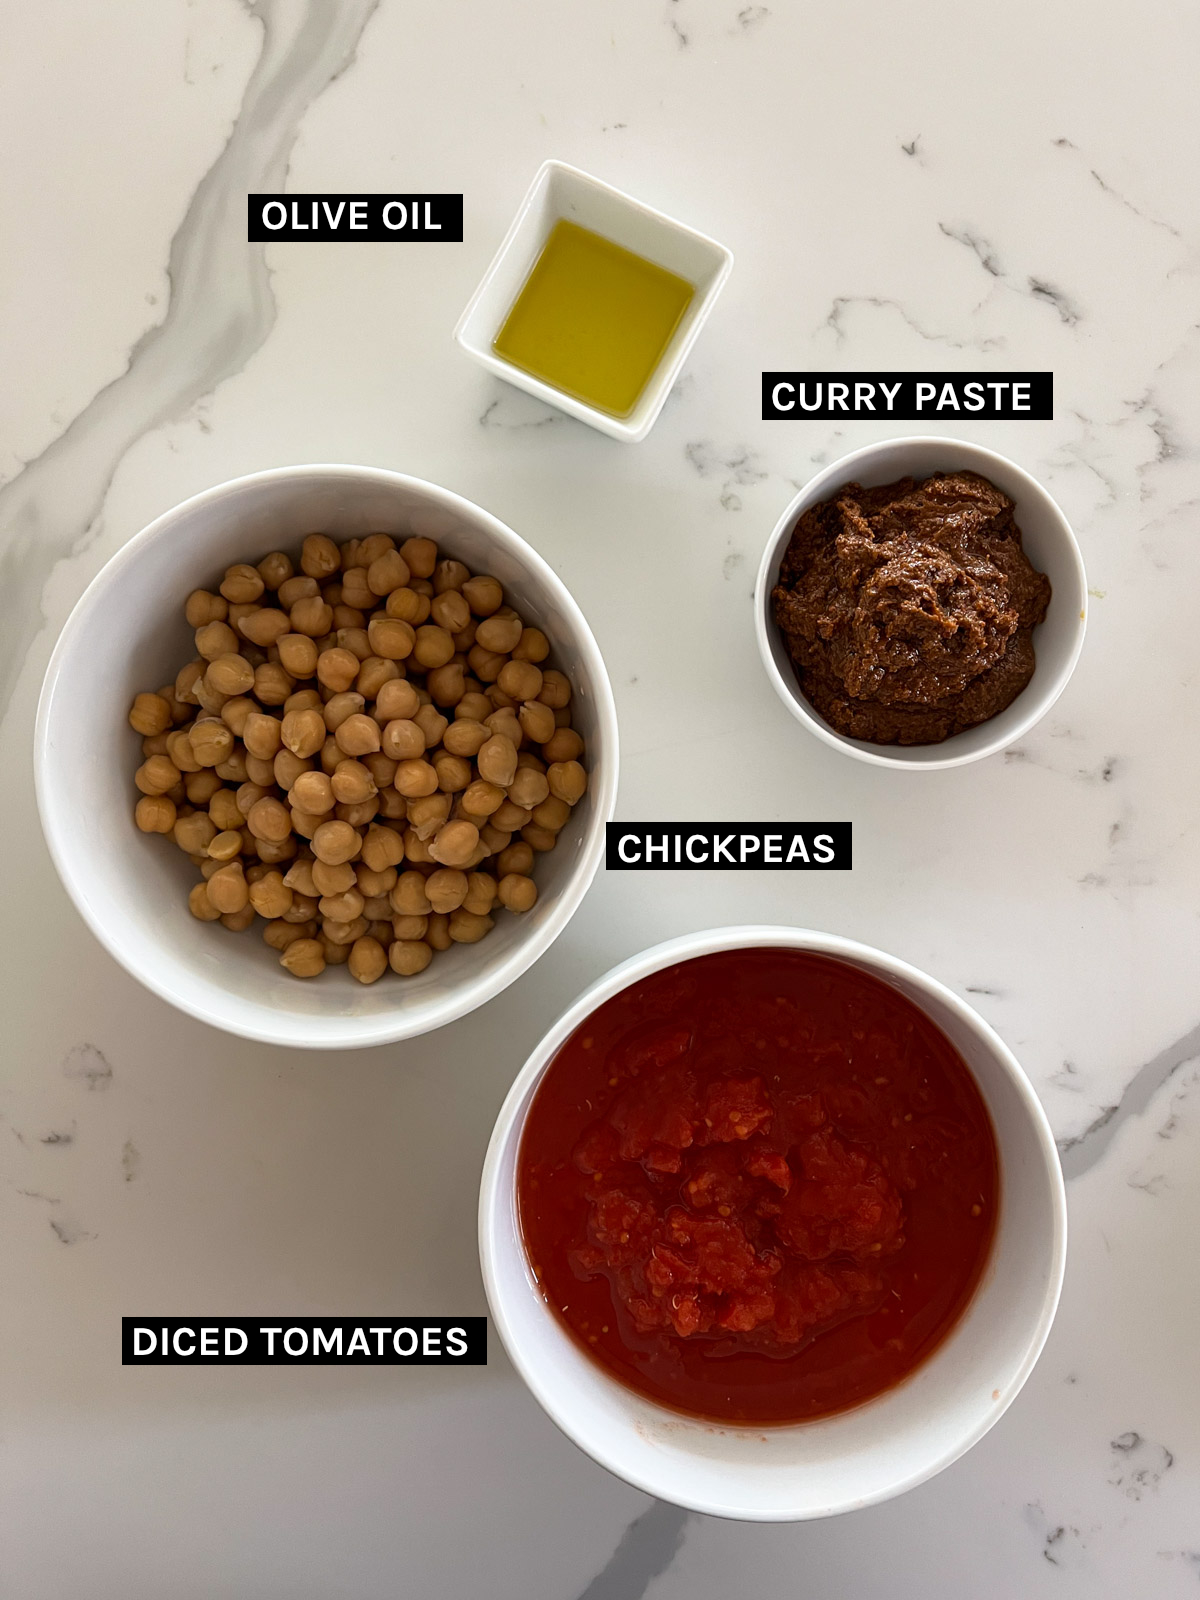 olive oil, curry paste, chickpea, diced tomatoes on a white benchtop